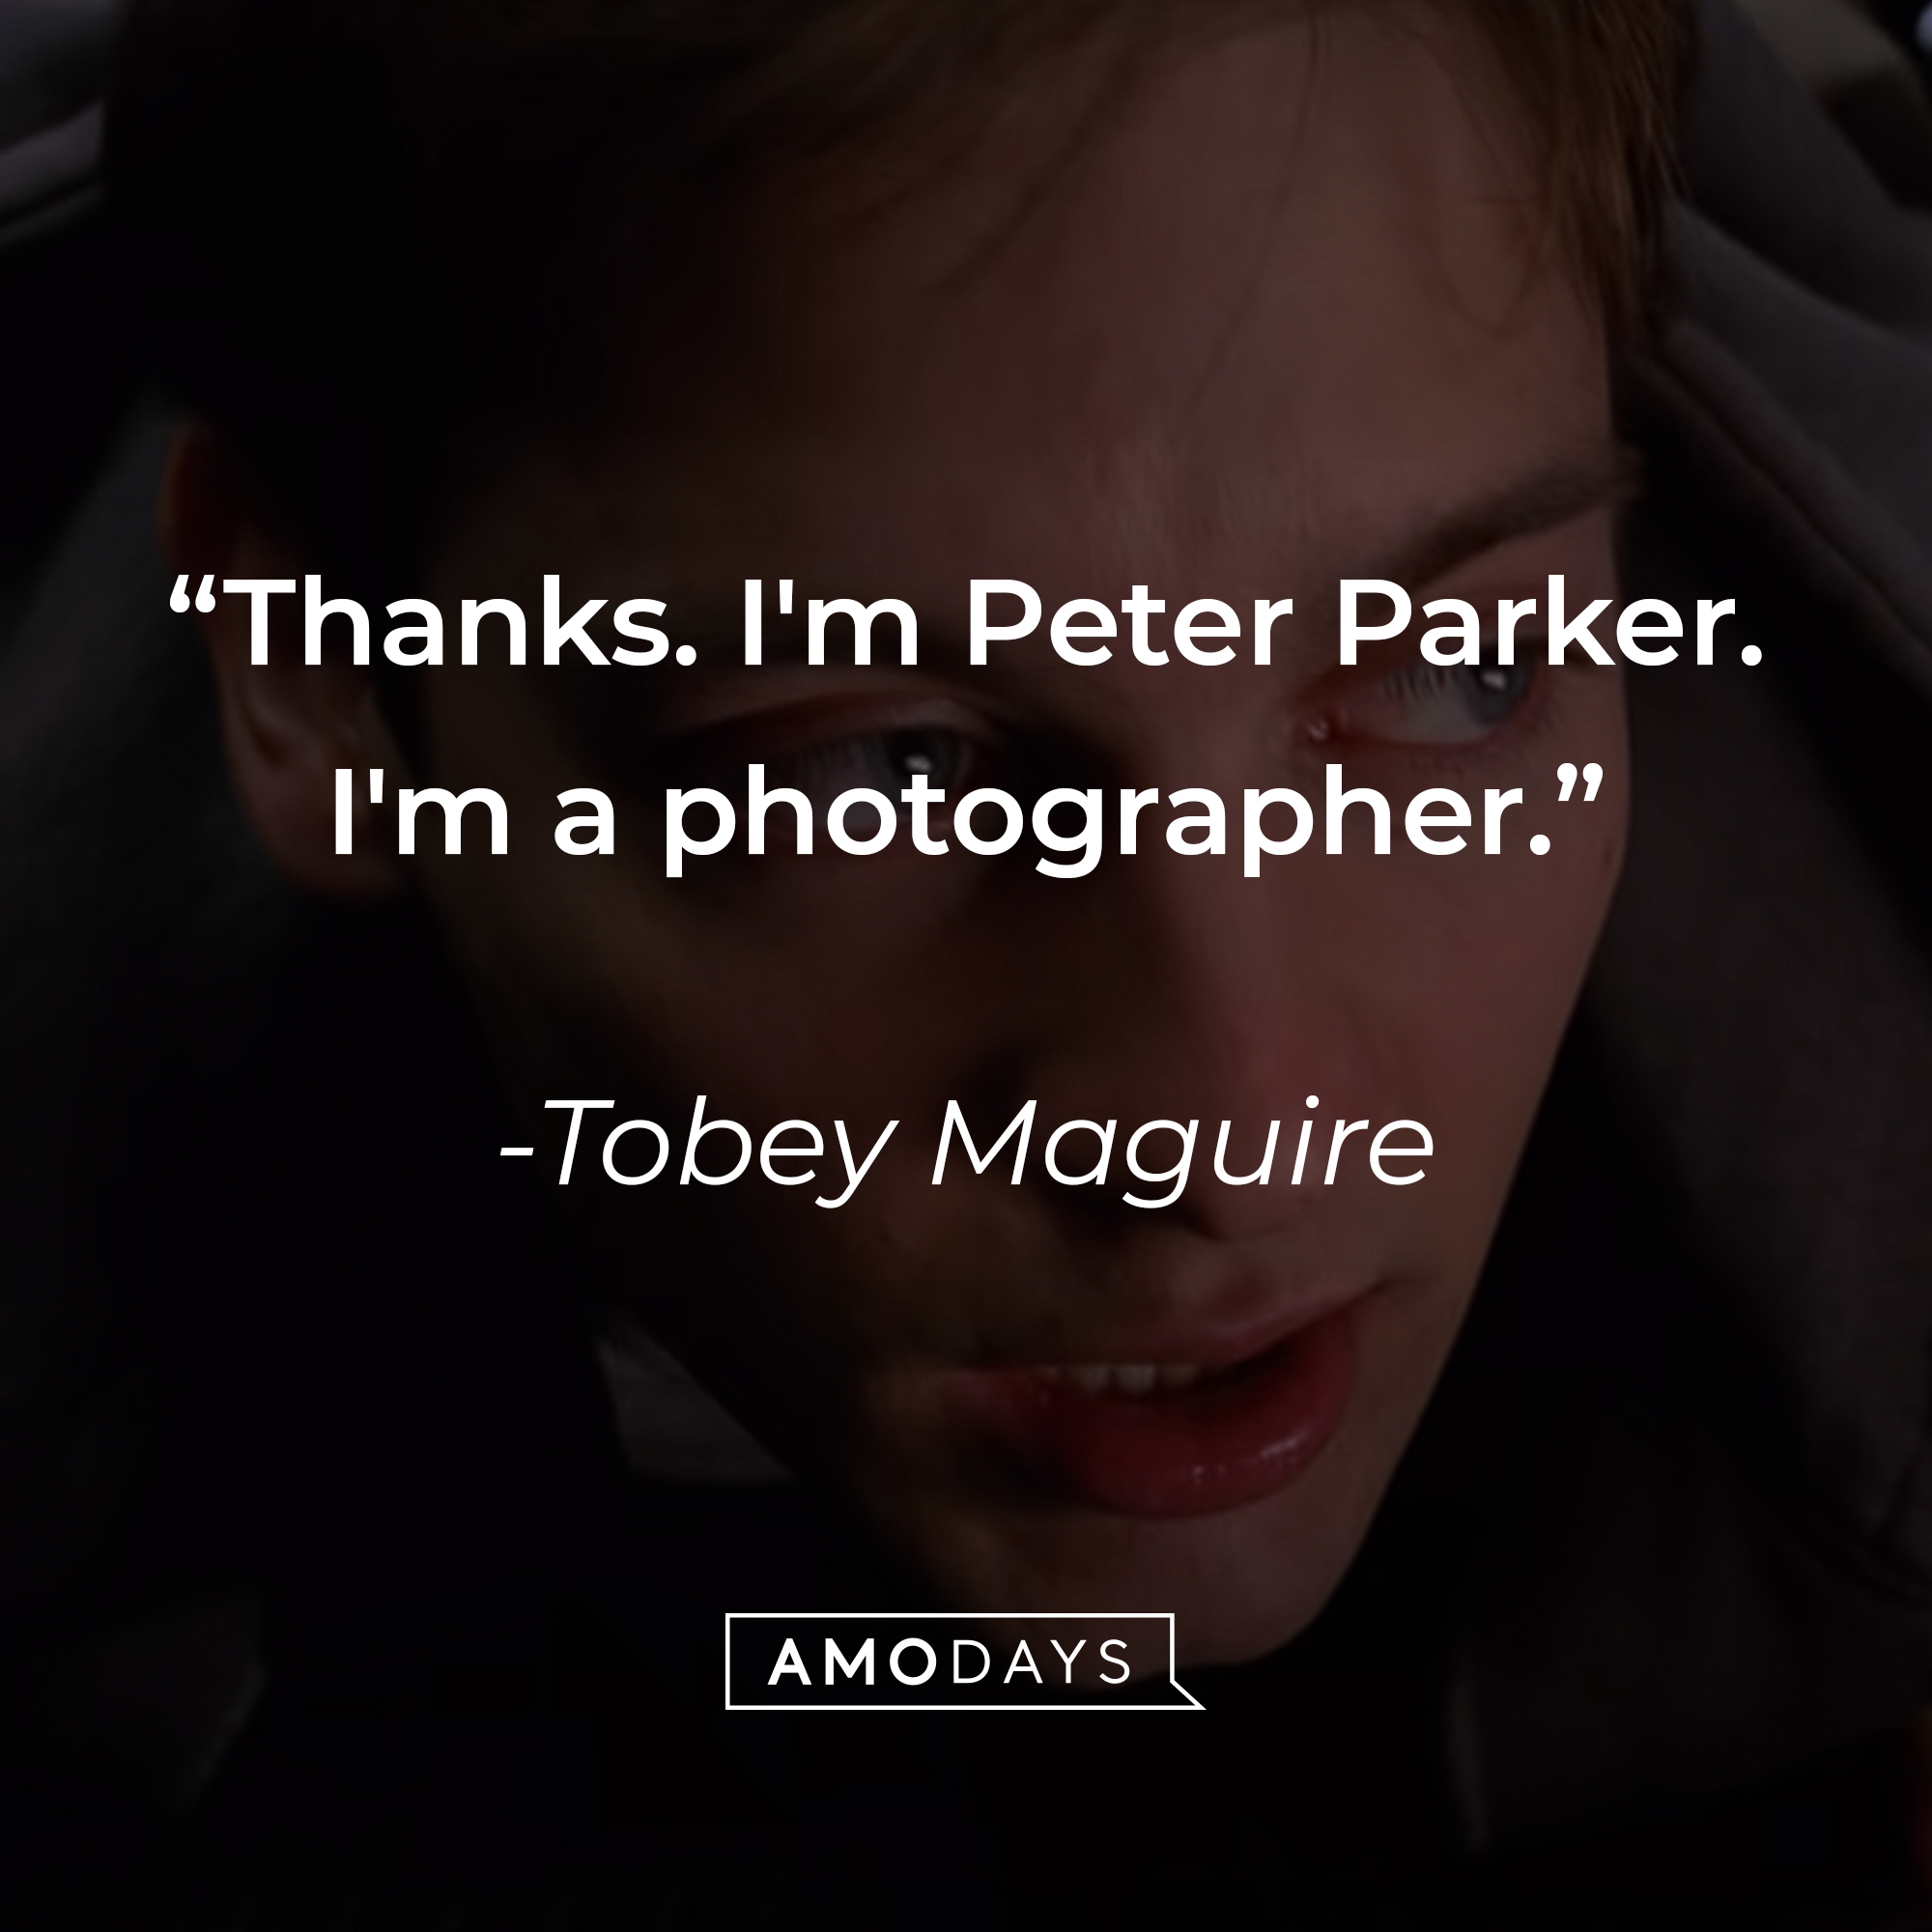 Tobey Maguire's quote: “Thanks. I'm Peter Parker. I'm a photographer.” | Source: youtube.com/sonypictures